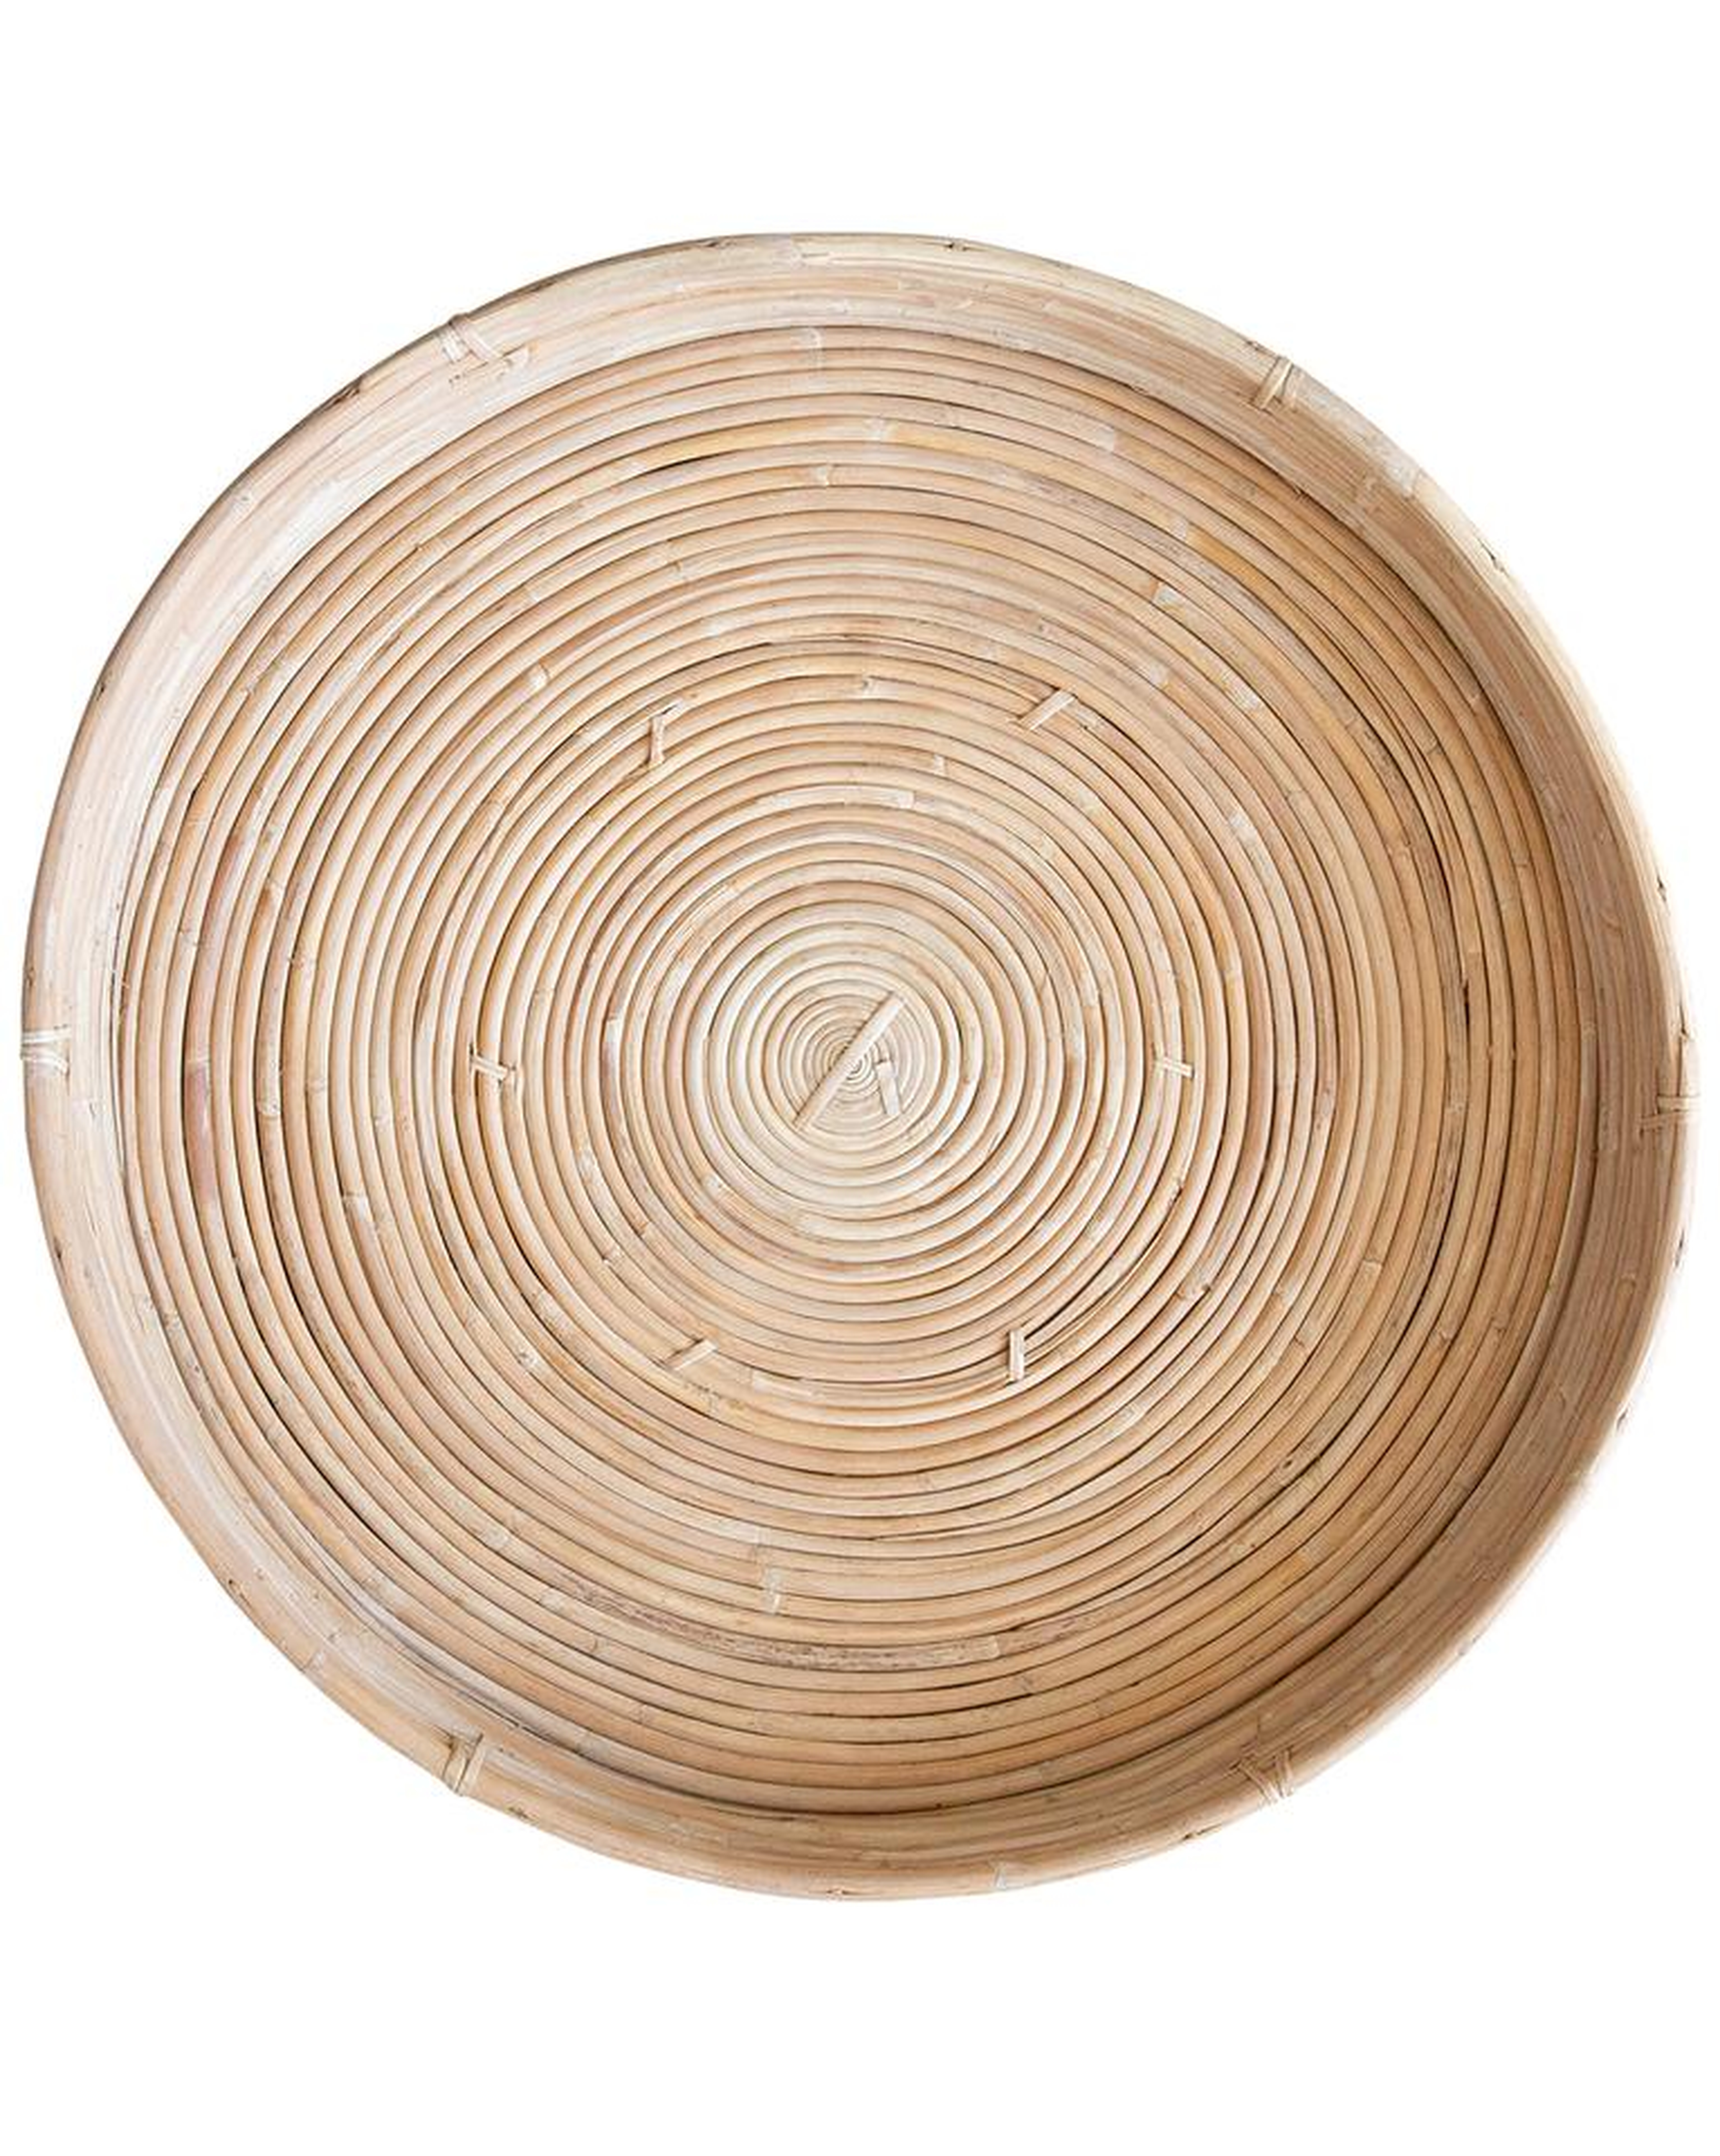 CANE RATTAN ROUND LARGE TRAY - McGee & Co.